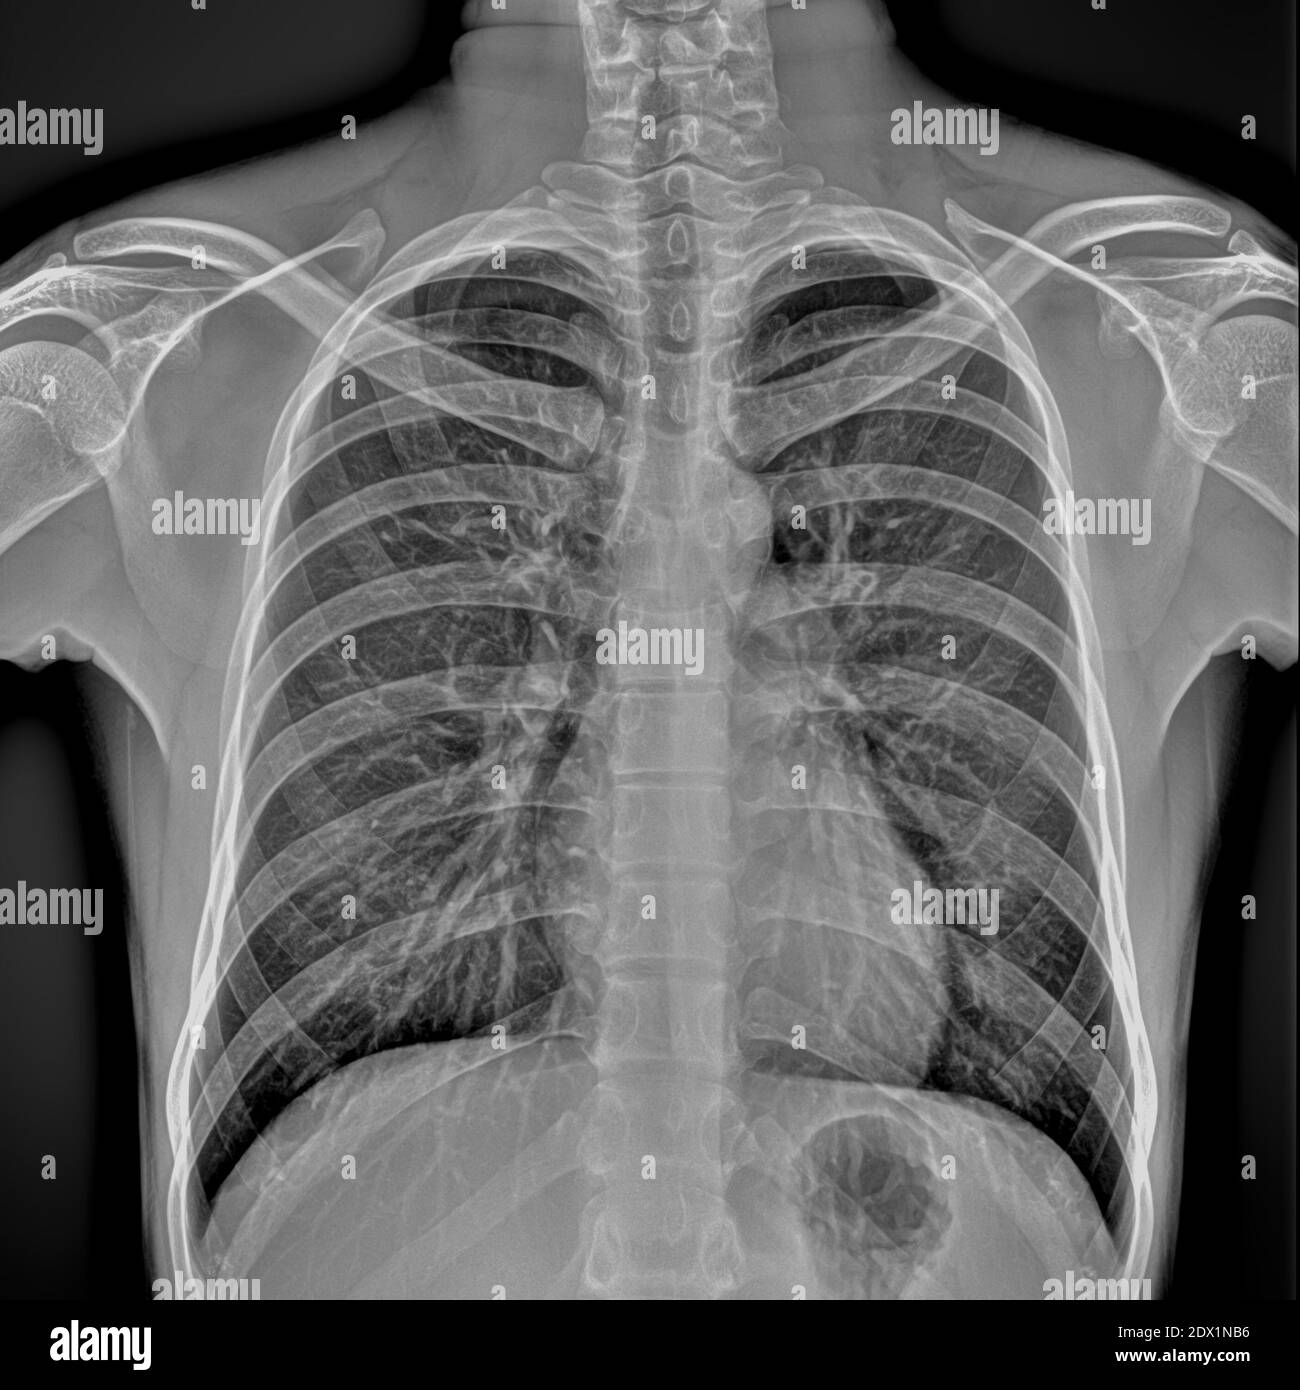 Chest Radiography of a hospital patient Stock Photo